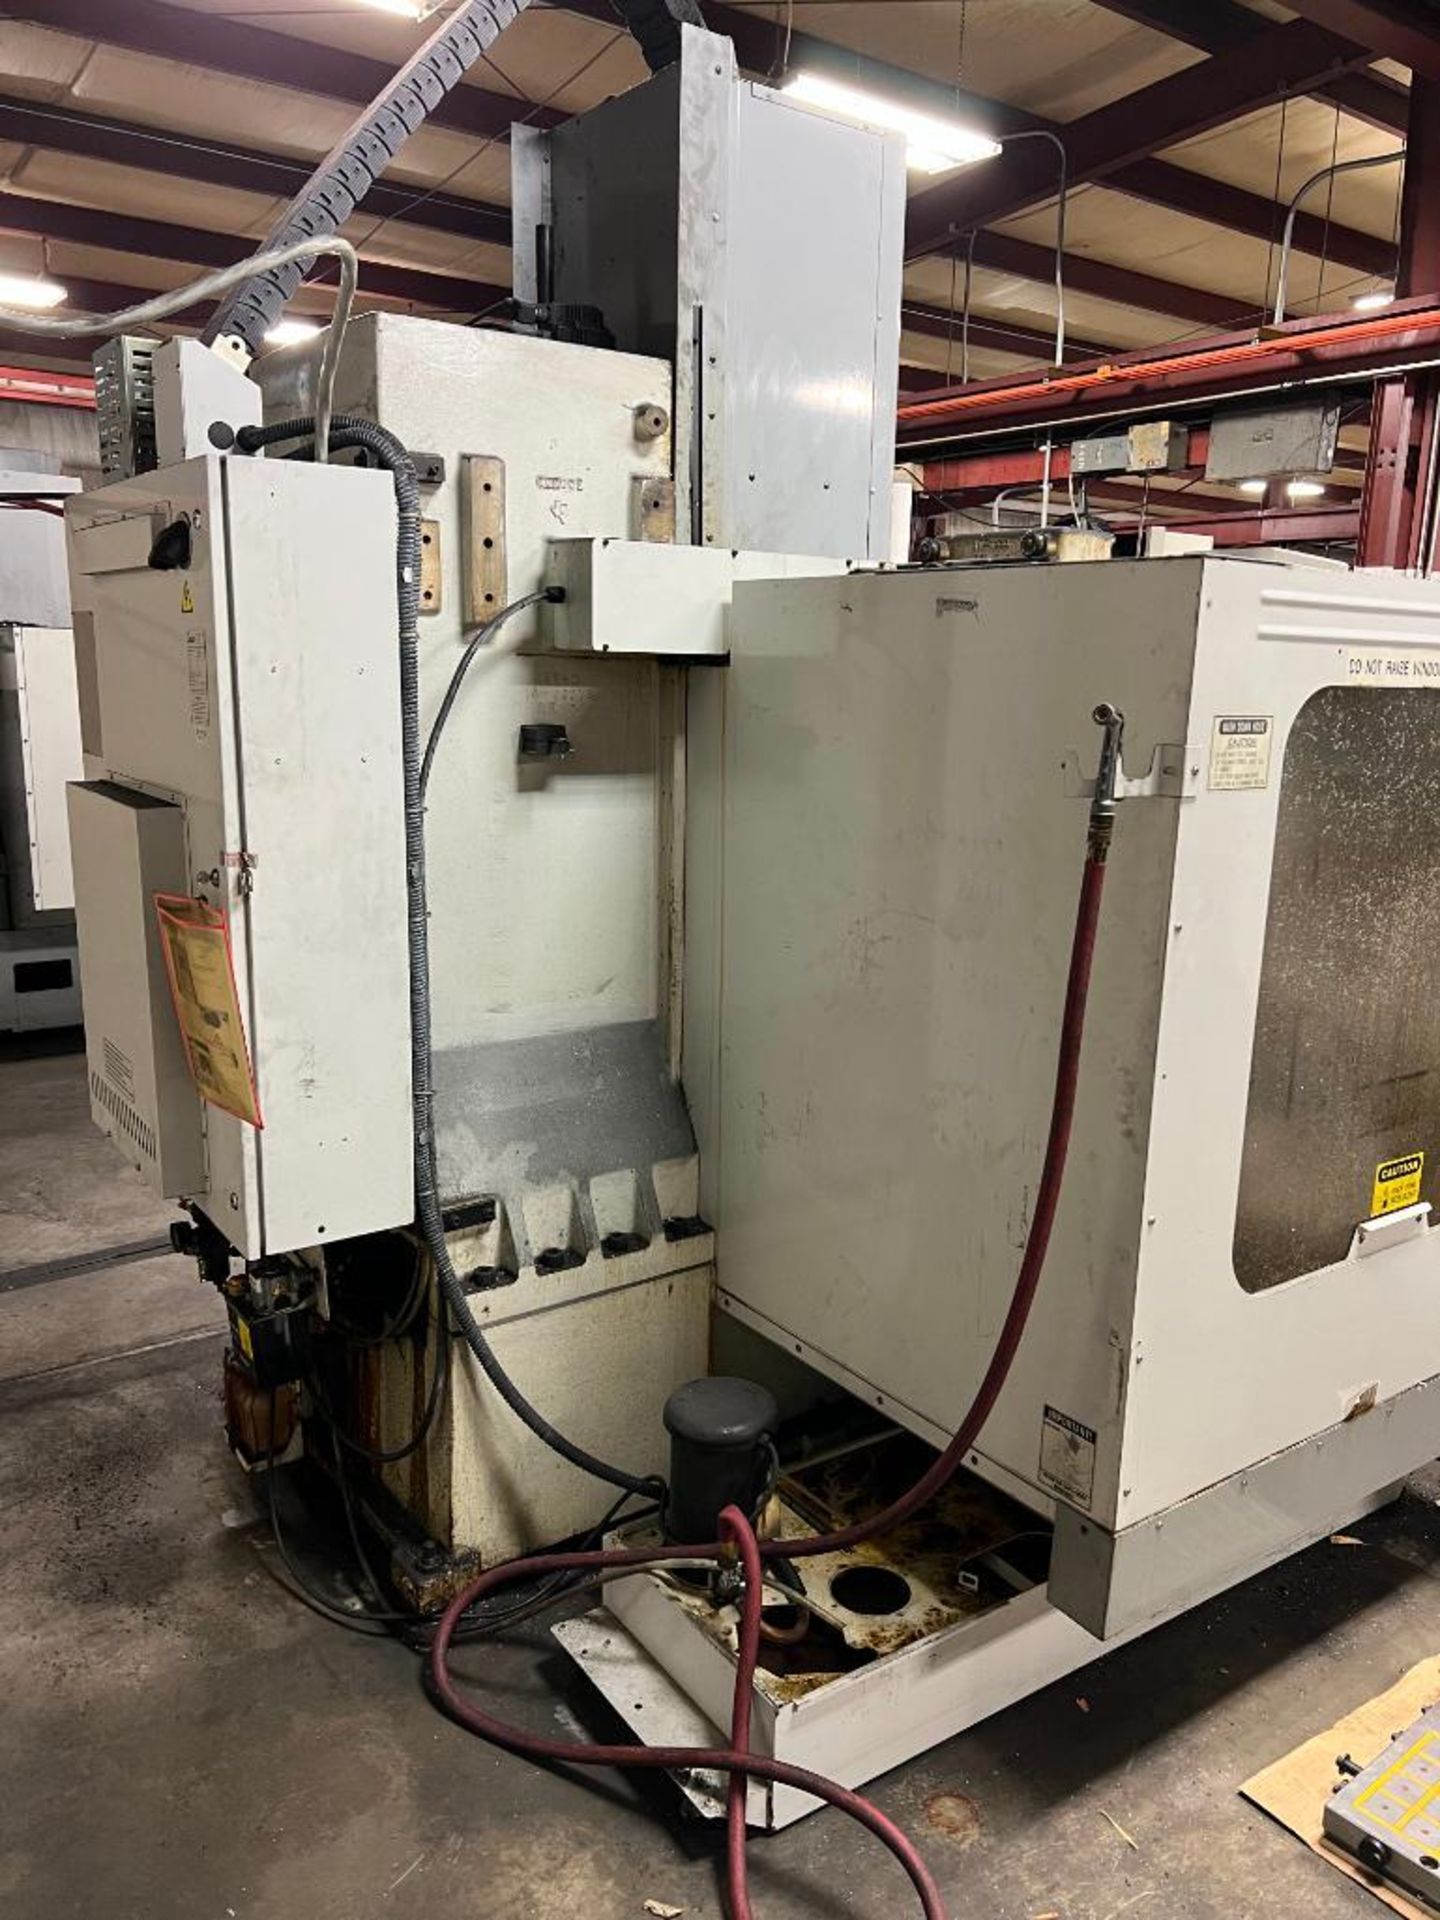 2000 Haas VF-3 3-Axis Cnc Vertical Machining Center - Image 7 of 12